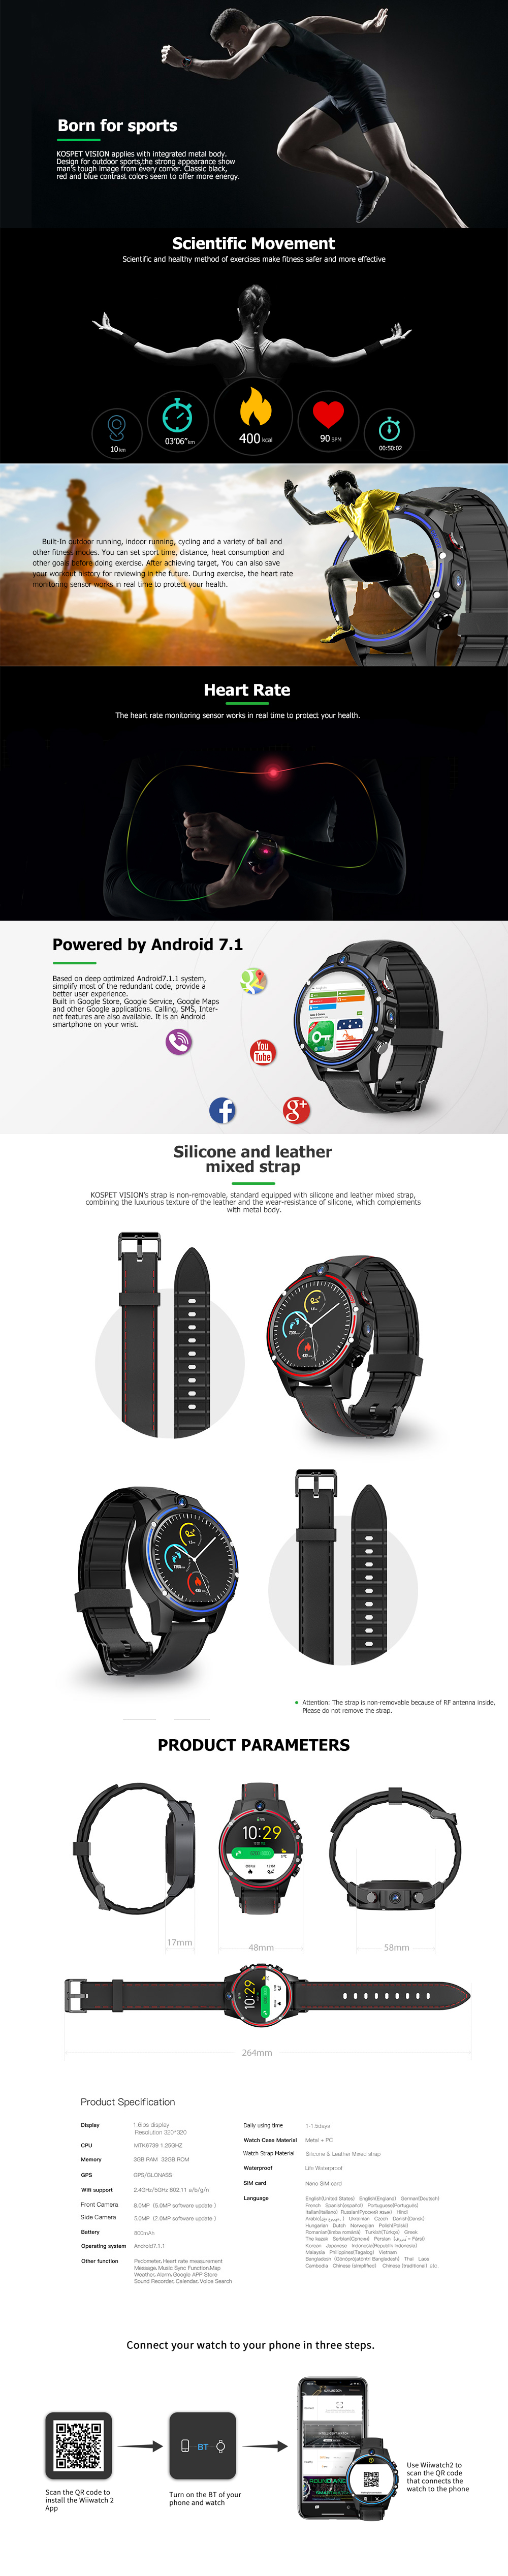 Kospet Vision 1.6' LTPS Crystal Display 3G+32G 5.0MP Front-facing Dual Camera 4G-LTE Video Call 800mAh Google Play Leather Strap Smart Watch Phone 28